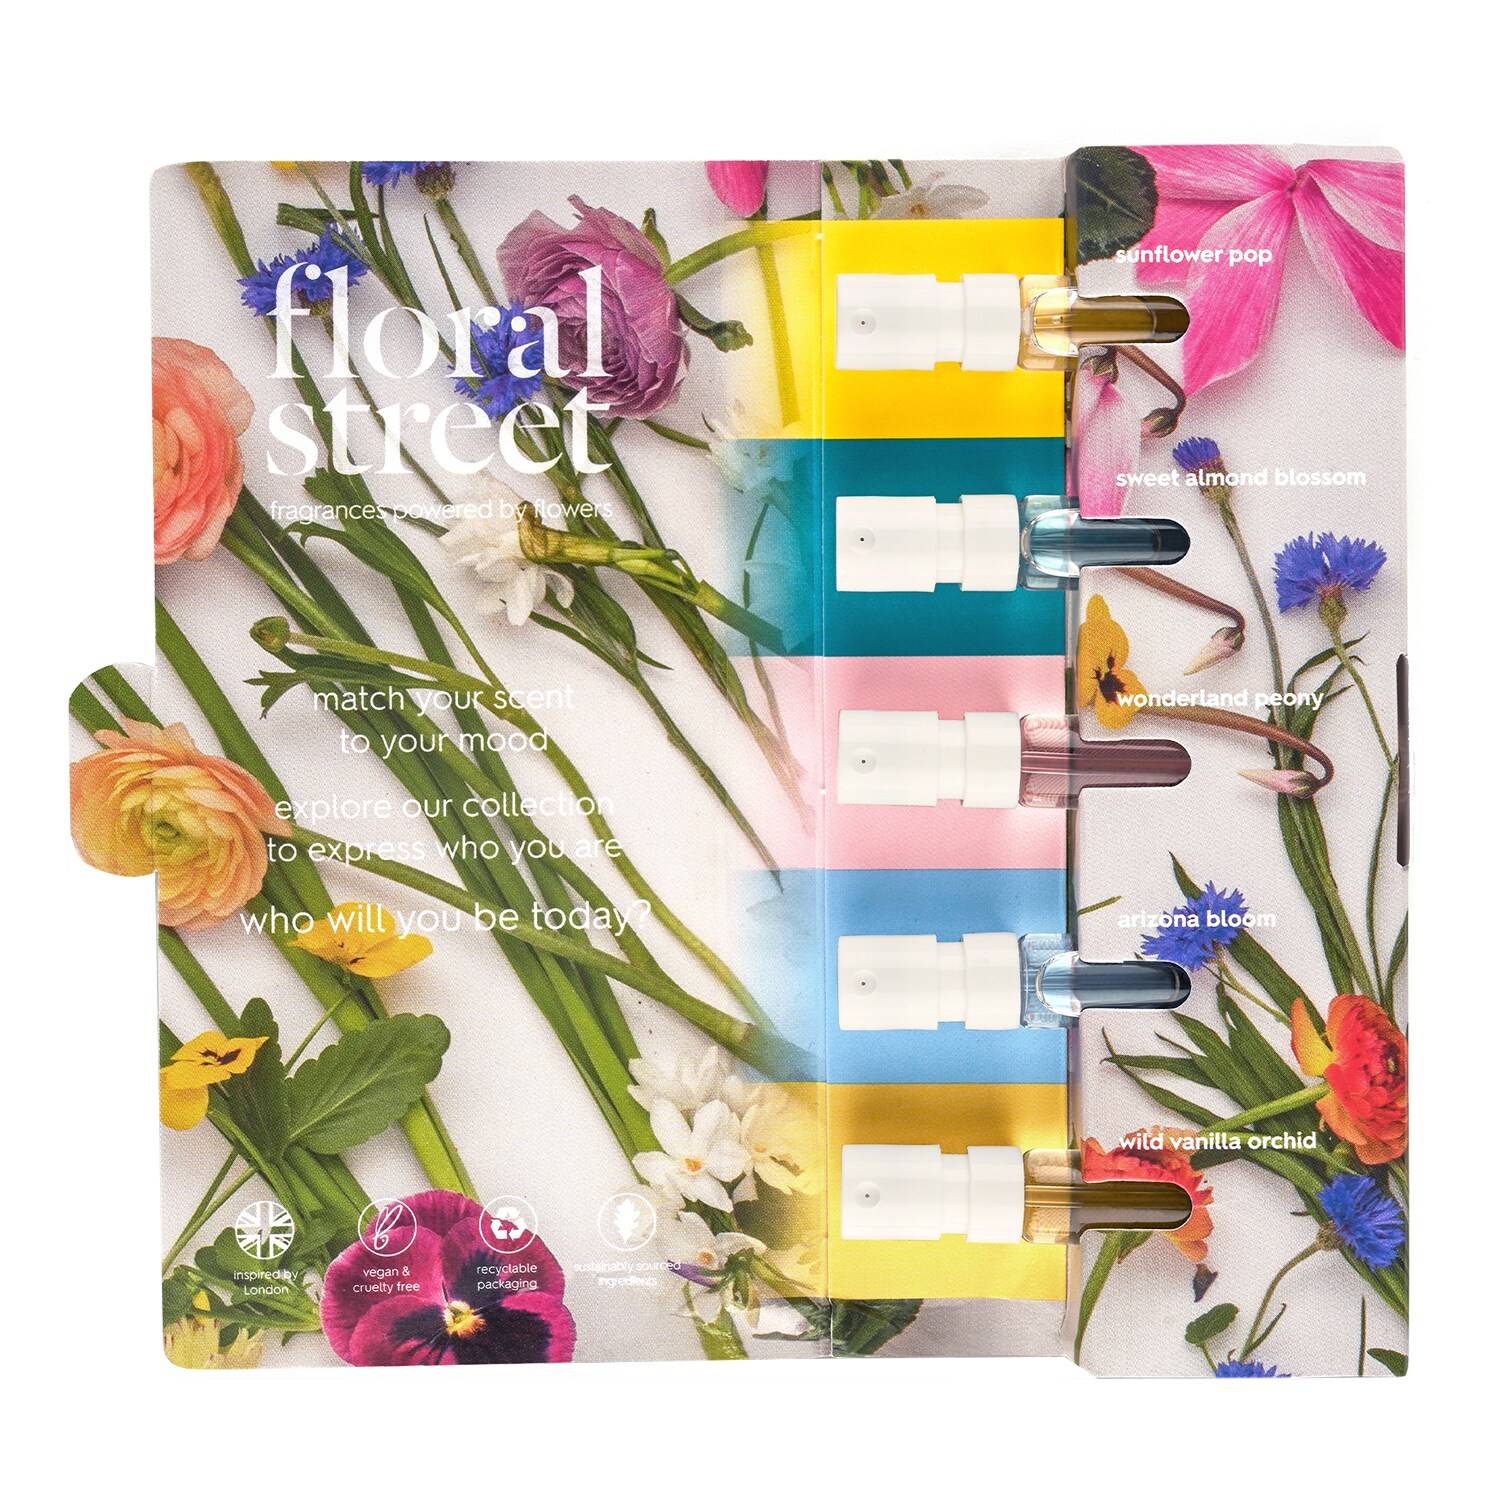 Floral Street Vial Discovery Set